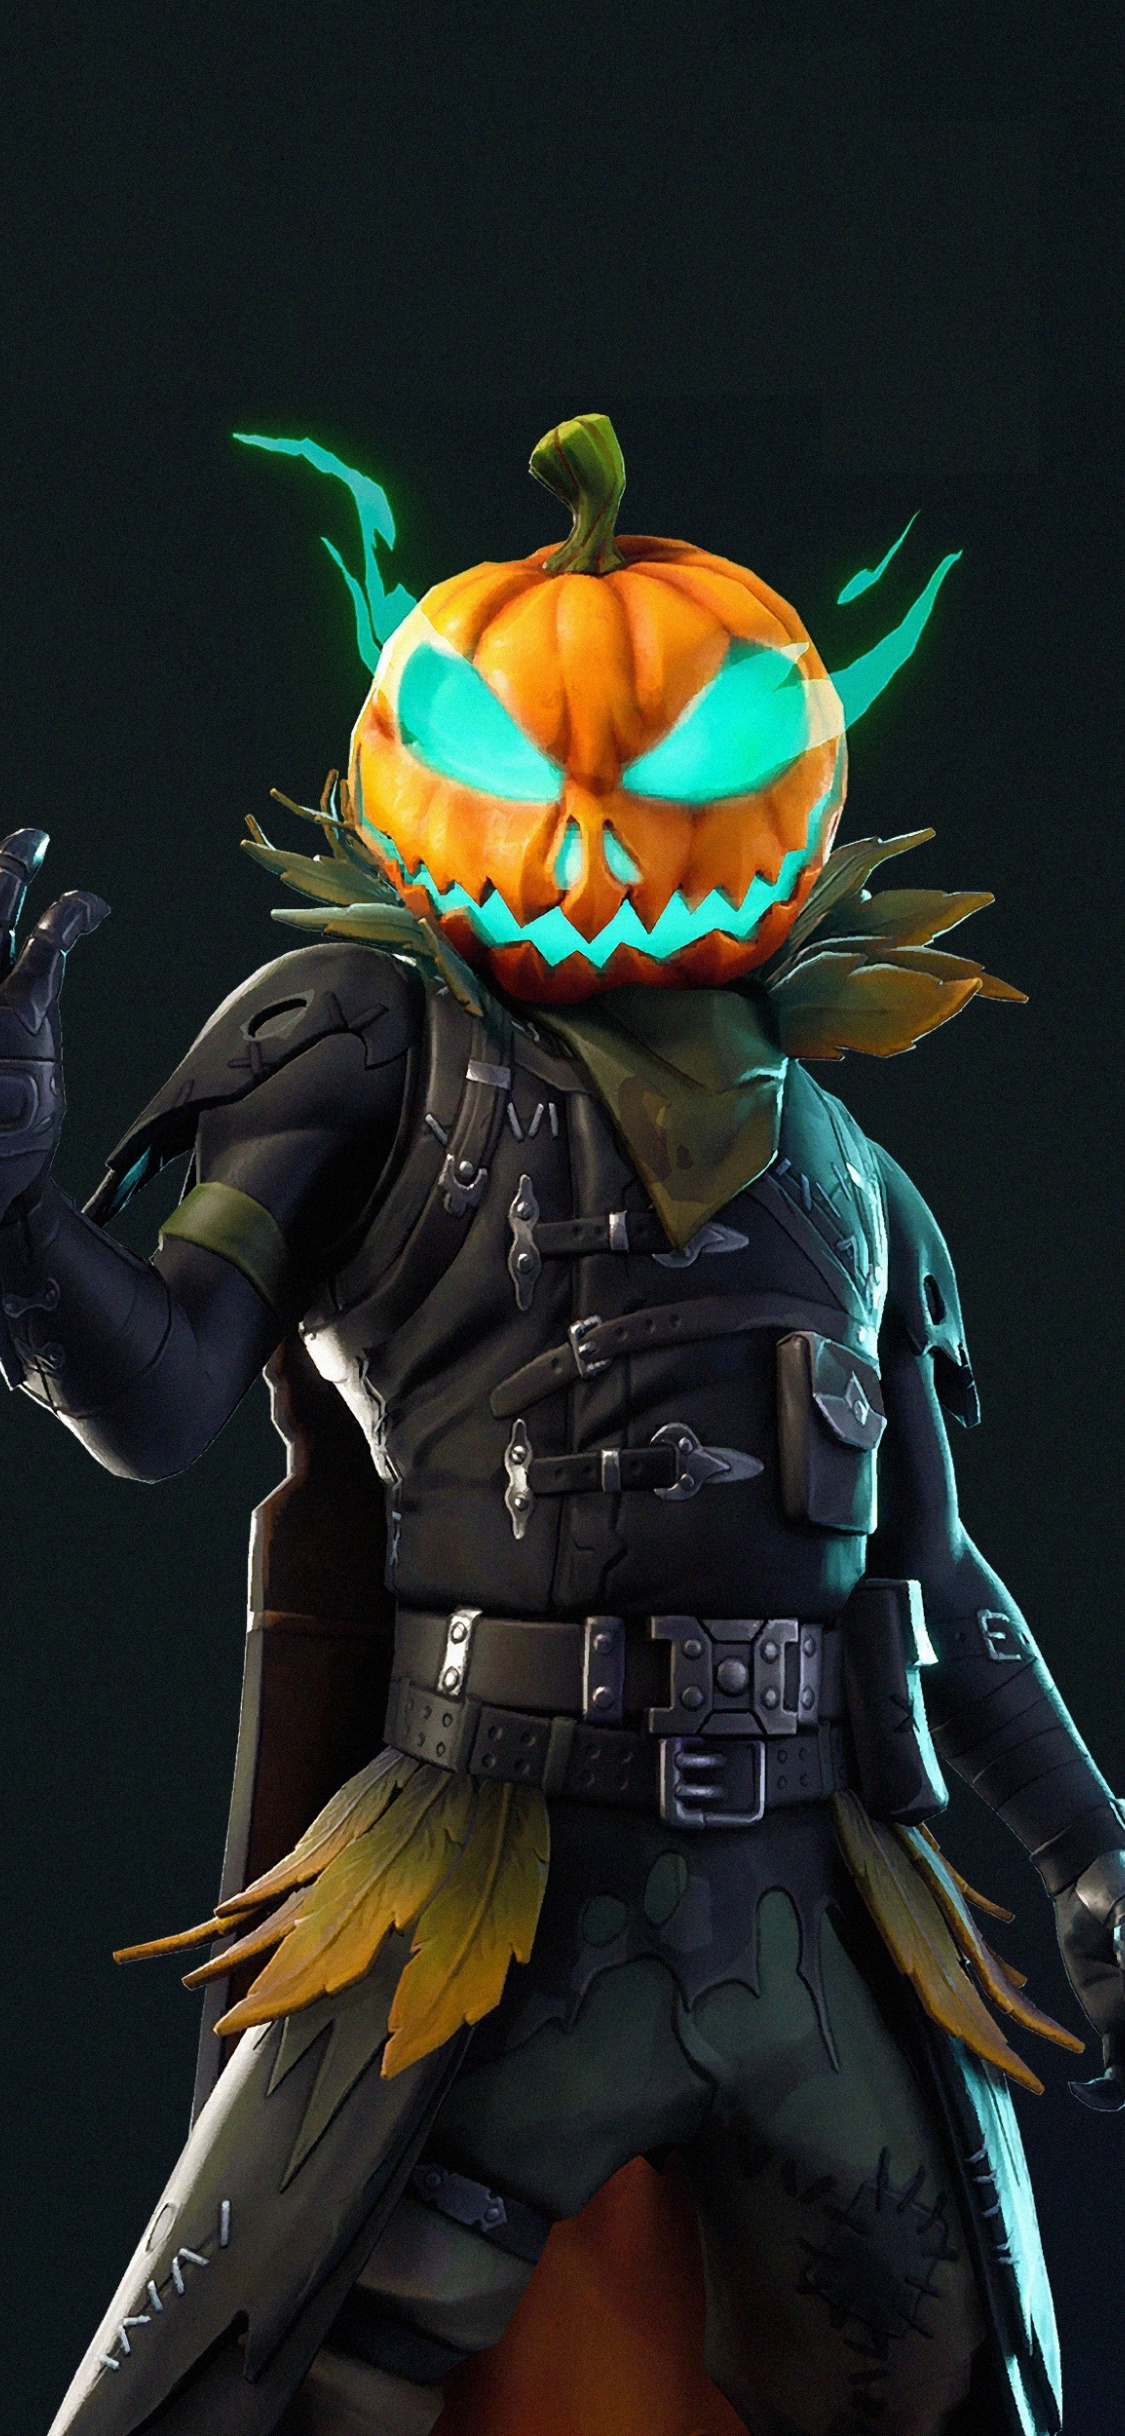 Download 1125x2436 wallpaper fortnite, video game, hollowhead, halloween, iphone x 1125x2436 HD image, background, 15153